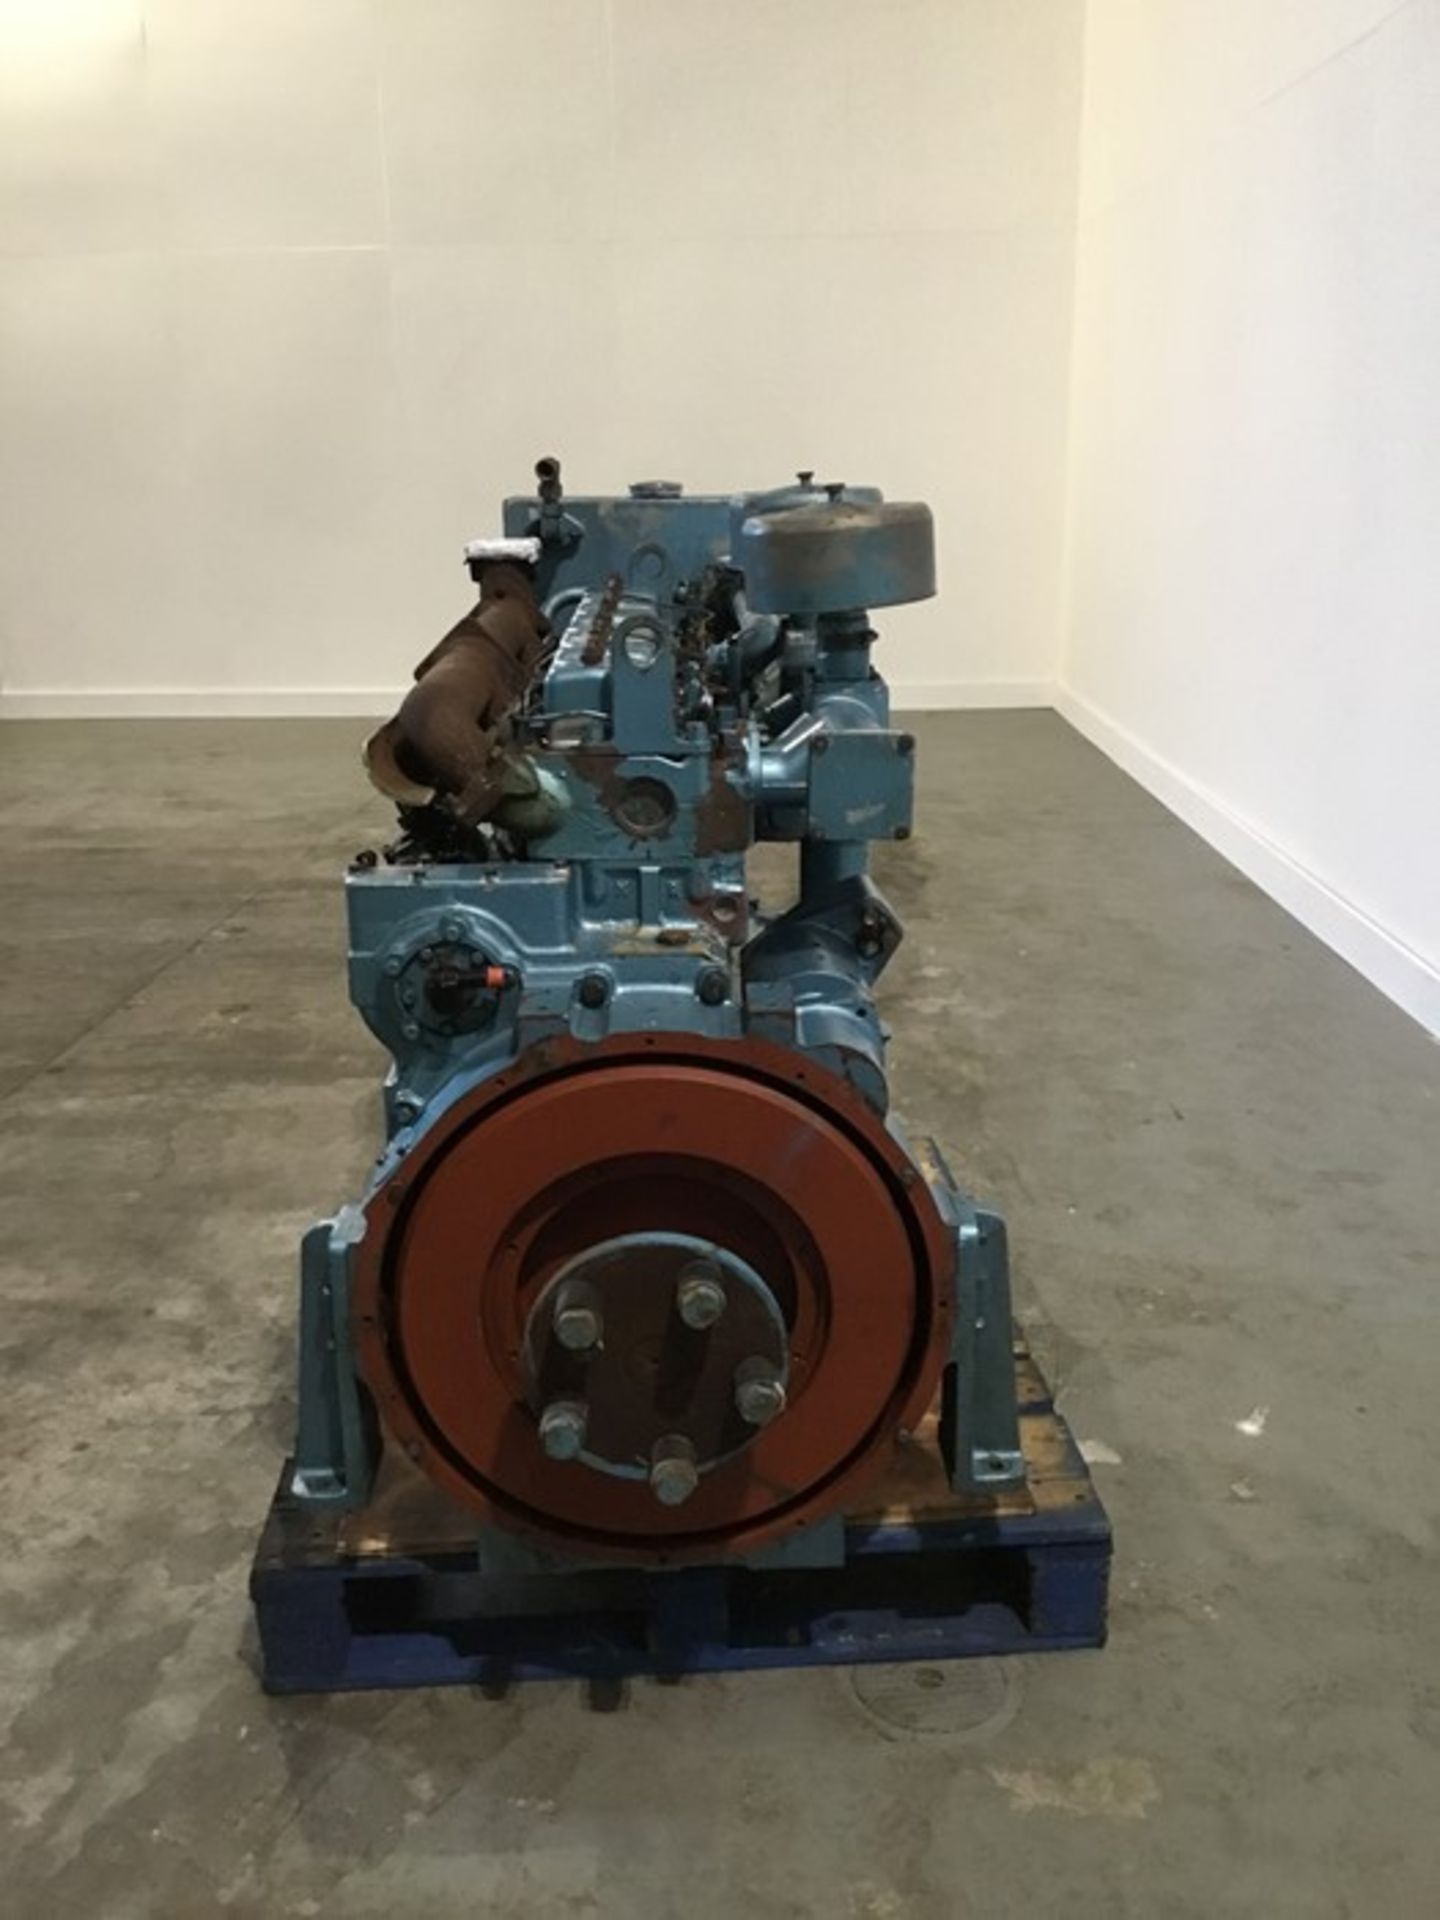 Dorman 6LE Diesel Engine: Dorman 6LE 6cyl Non turbo Serial number 100765 used - Image 8 of 15